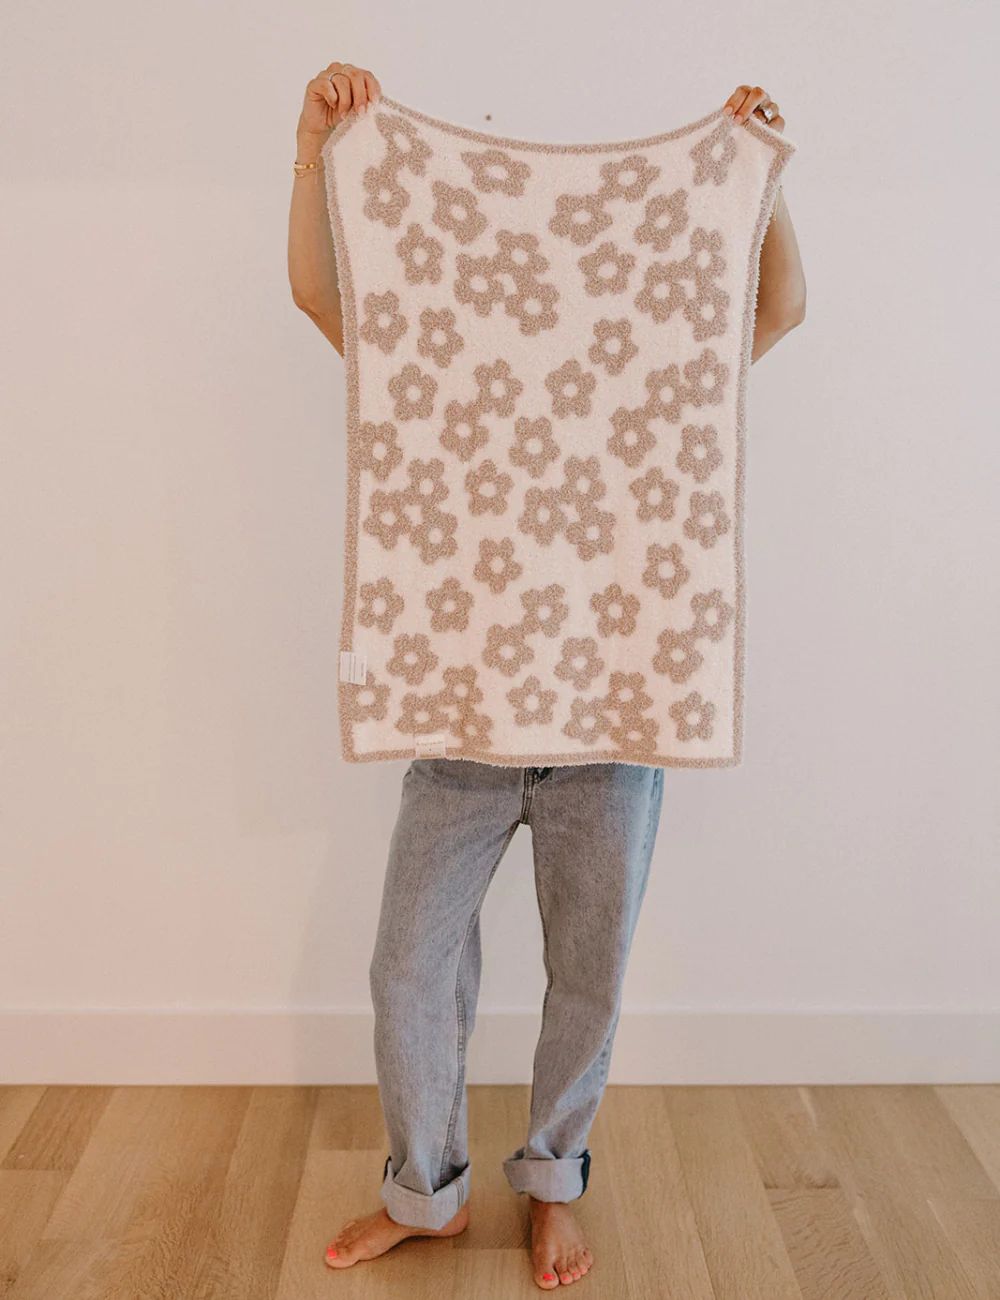 TSC x Madi Nelson: Daisies in Bloom Buttery Blanket | The Styled Collection